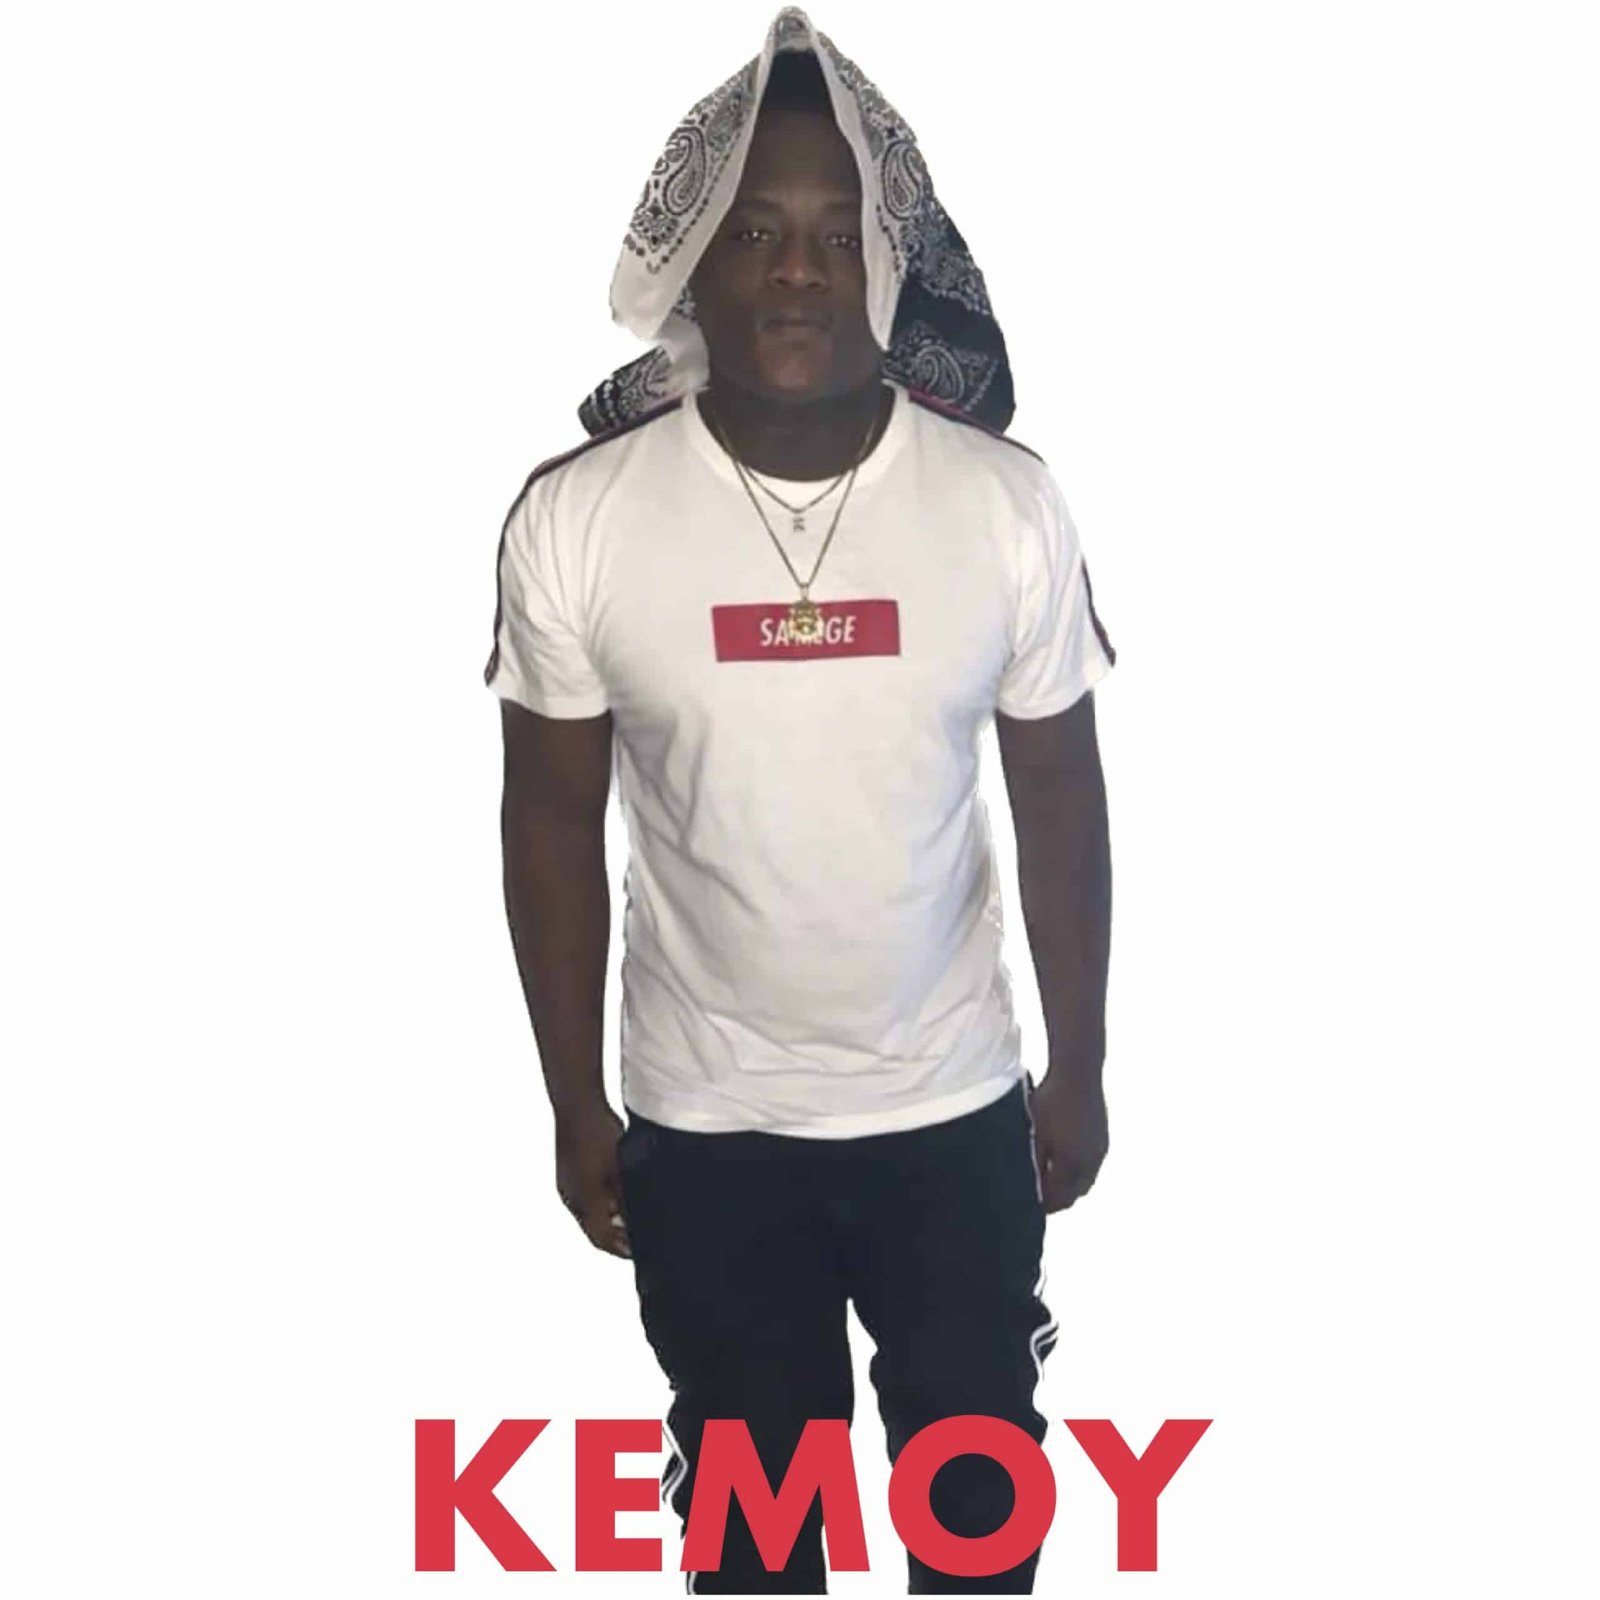 KEMOY SPEAKS ON LIVING FLASHY LIFESTYLE & THE “FINEST” THINGS